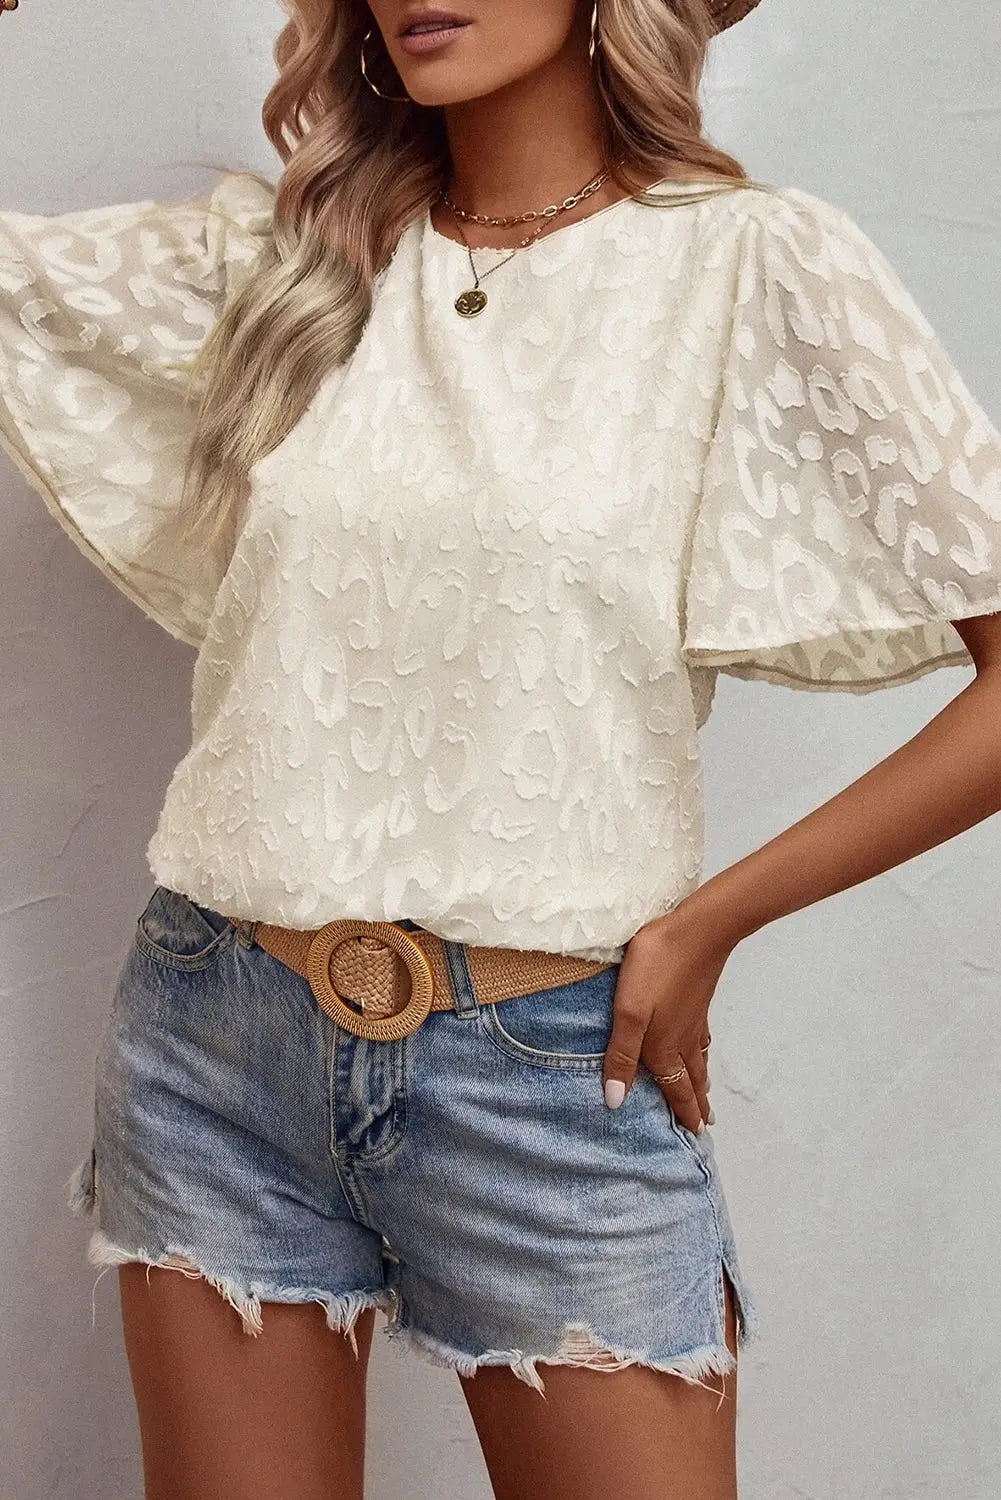 Beige elegant jacquard butterfly sleeve blouse - s / 100% polyester - tops/blouses & shirts